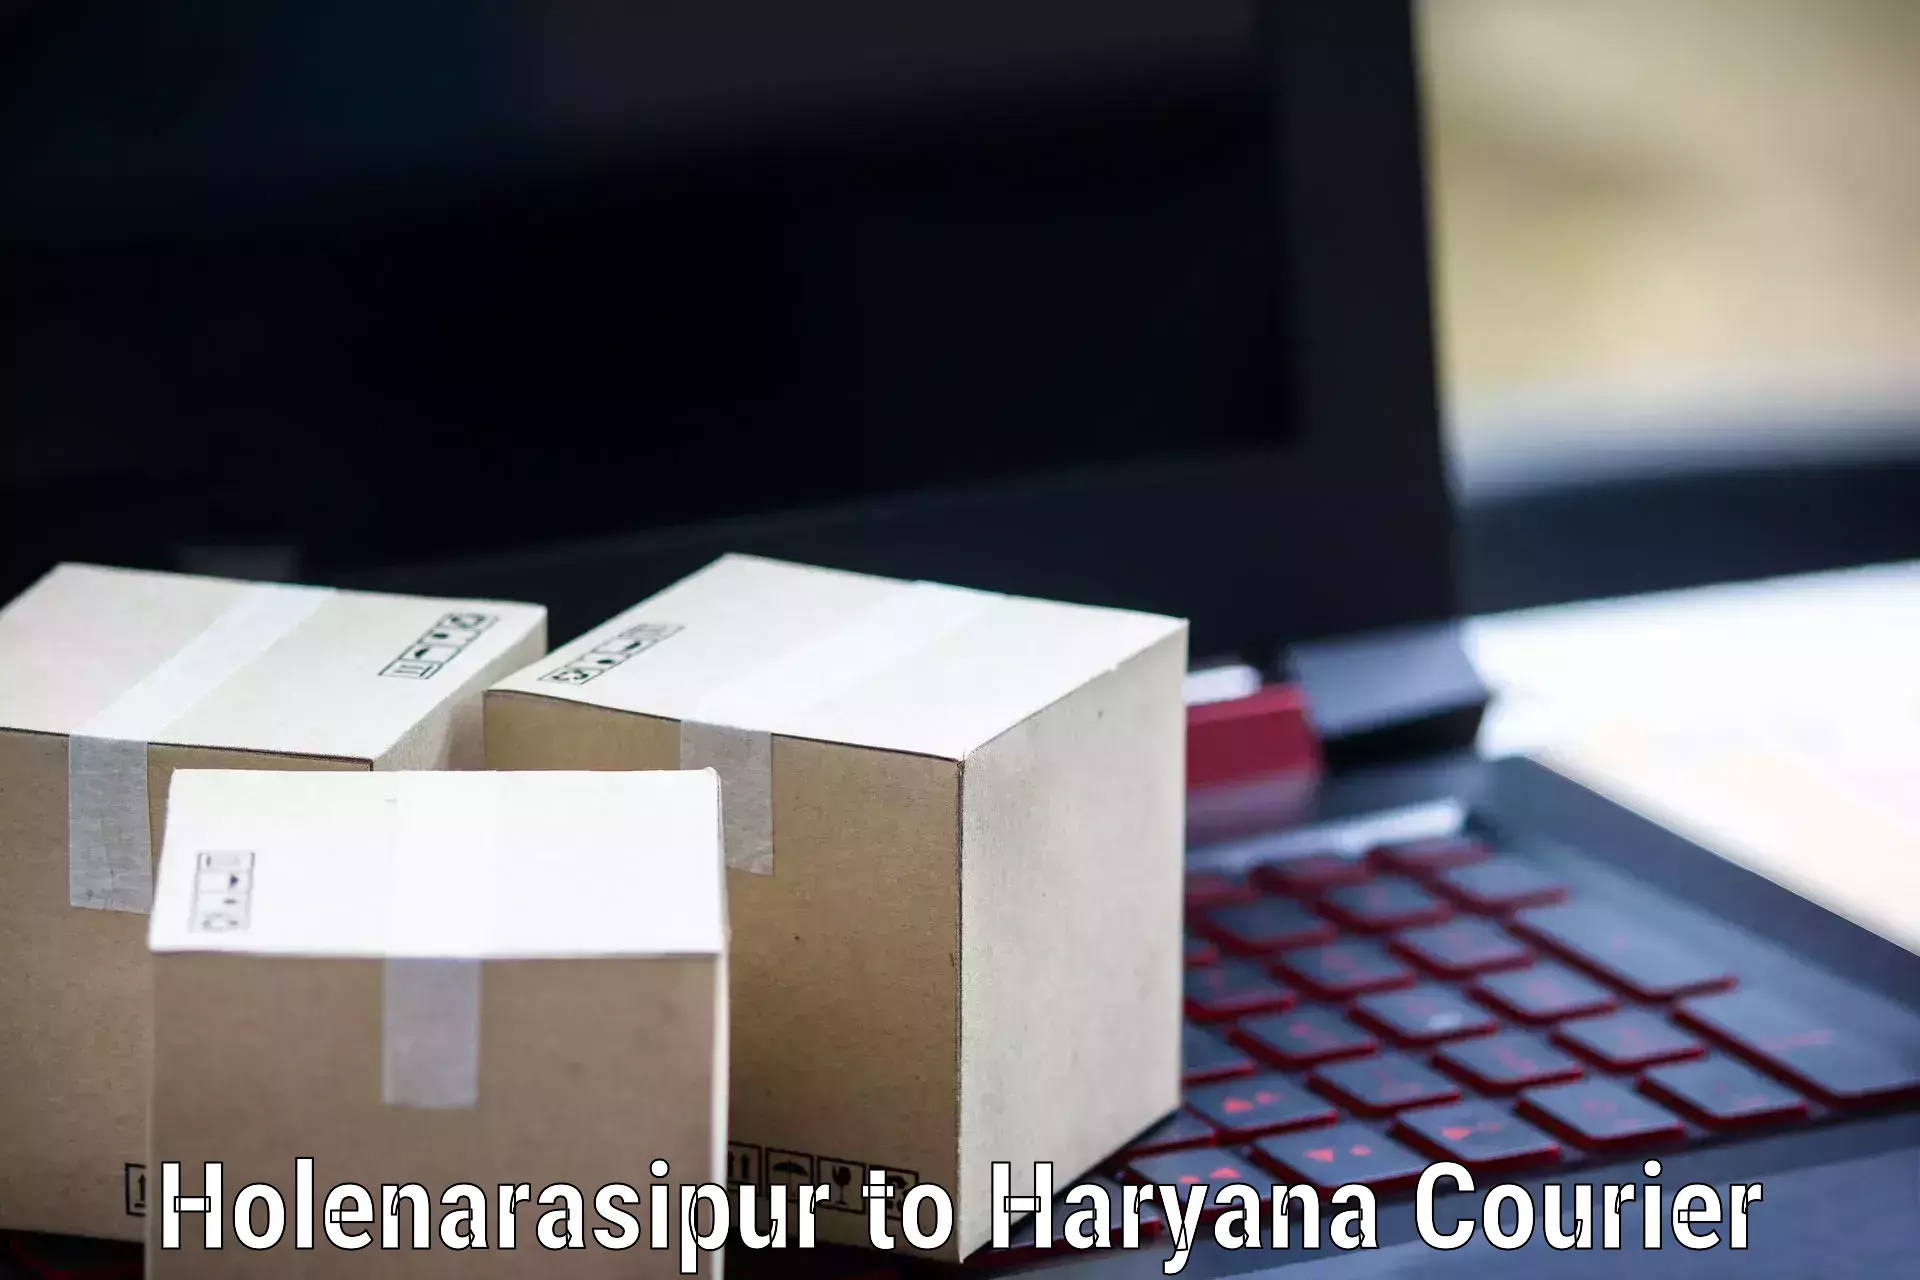 Customizable delivery plans Holenarasipur to NCR Haryana